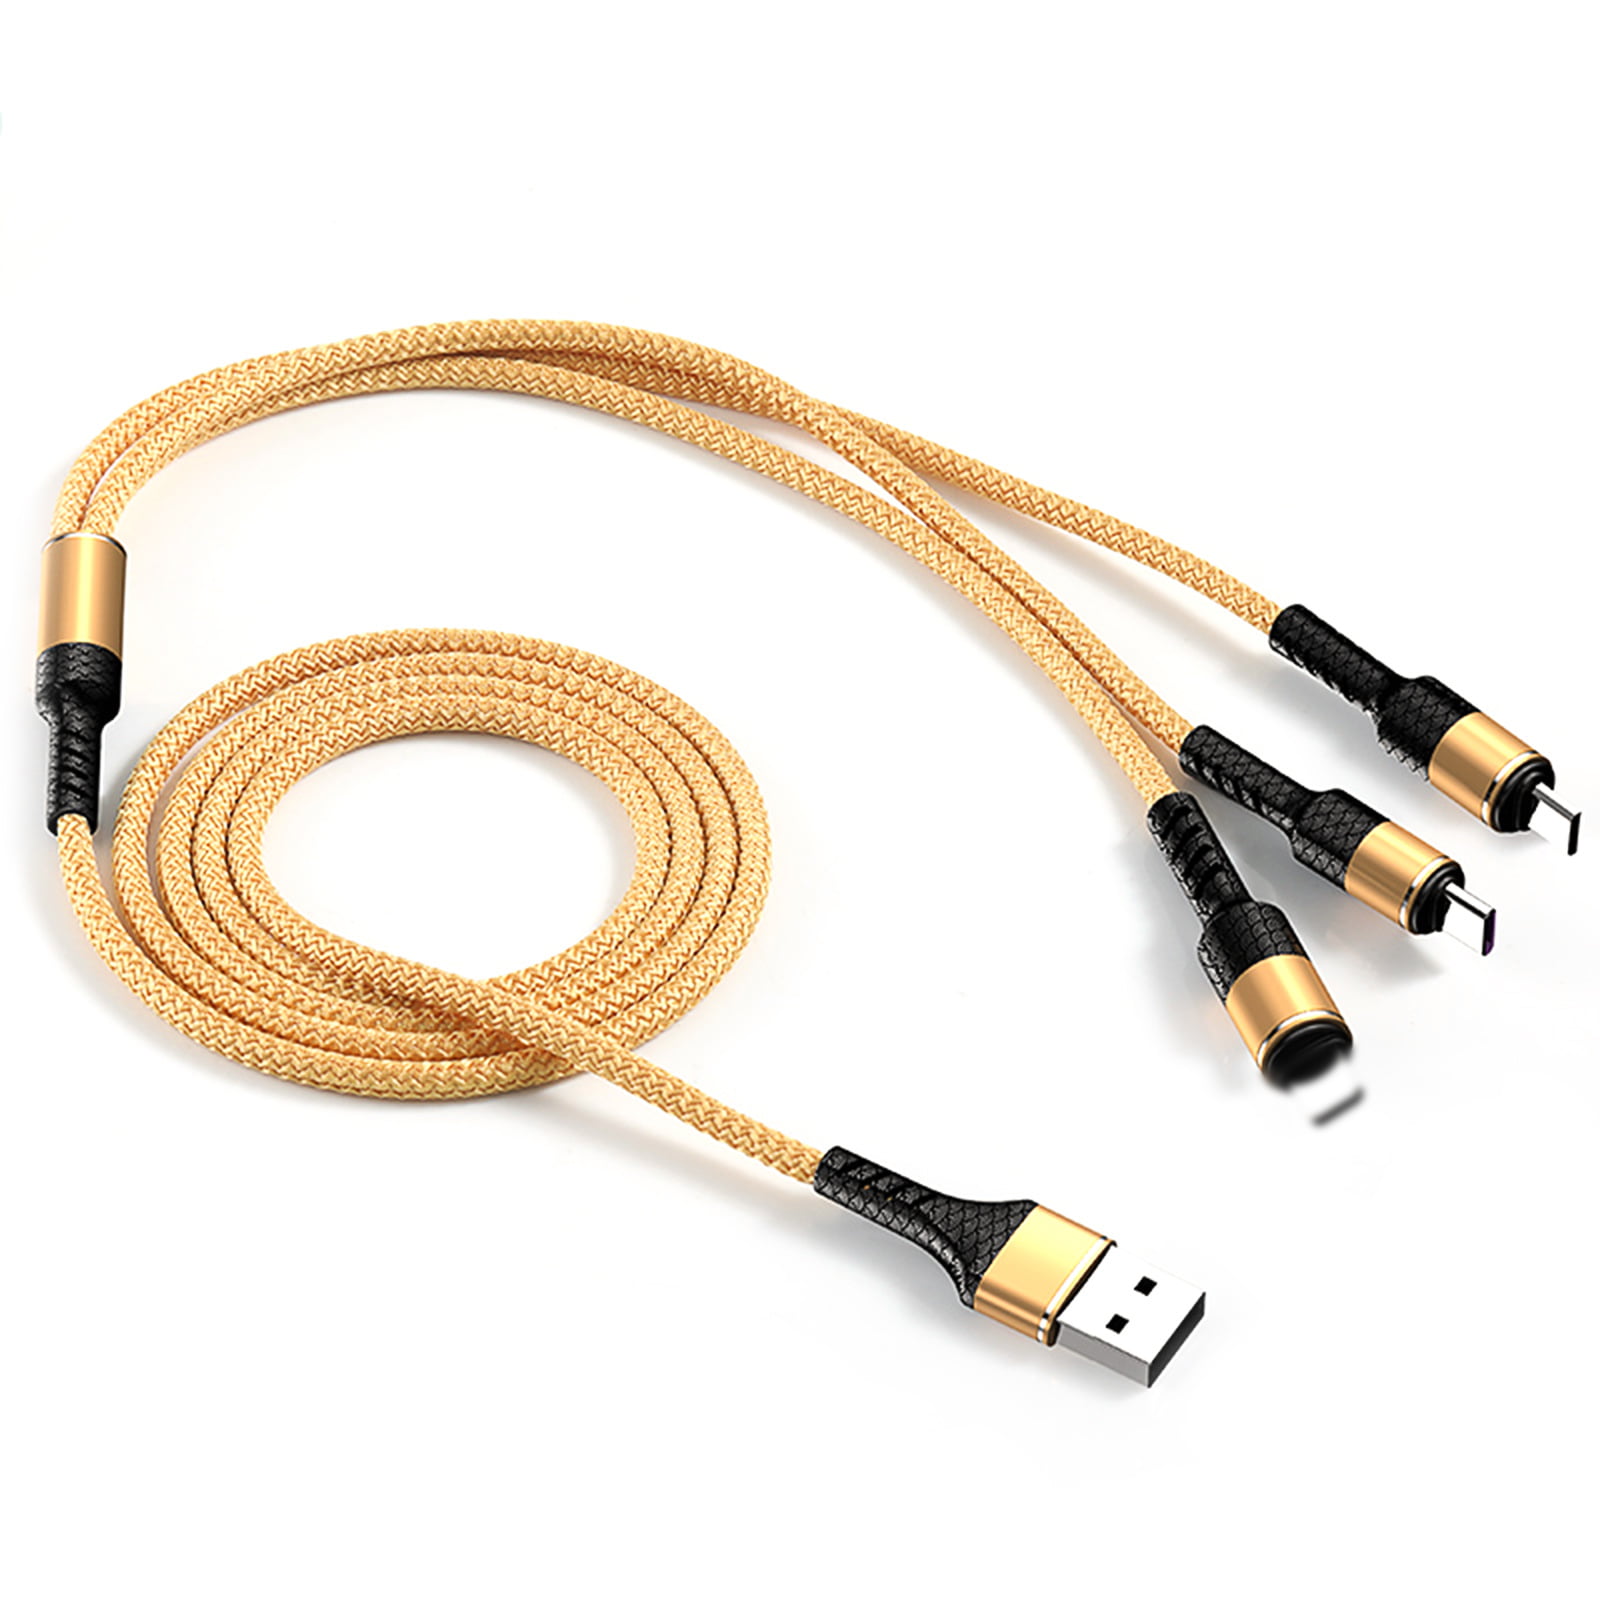 Long Hi-speed Gold Plated Copper Wire Core Micro USB Charging Charger Cable Cord 